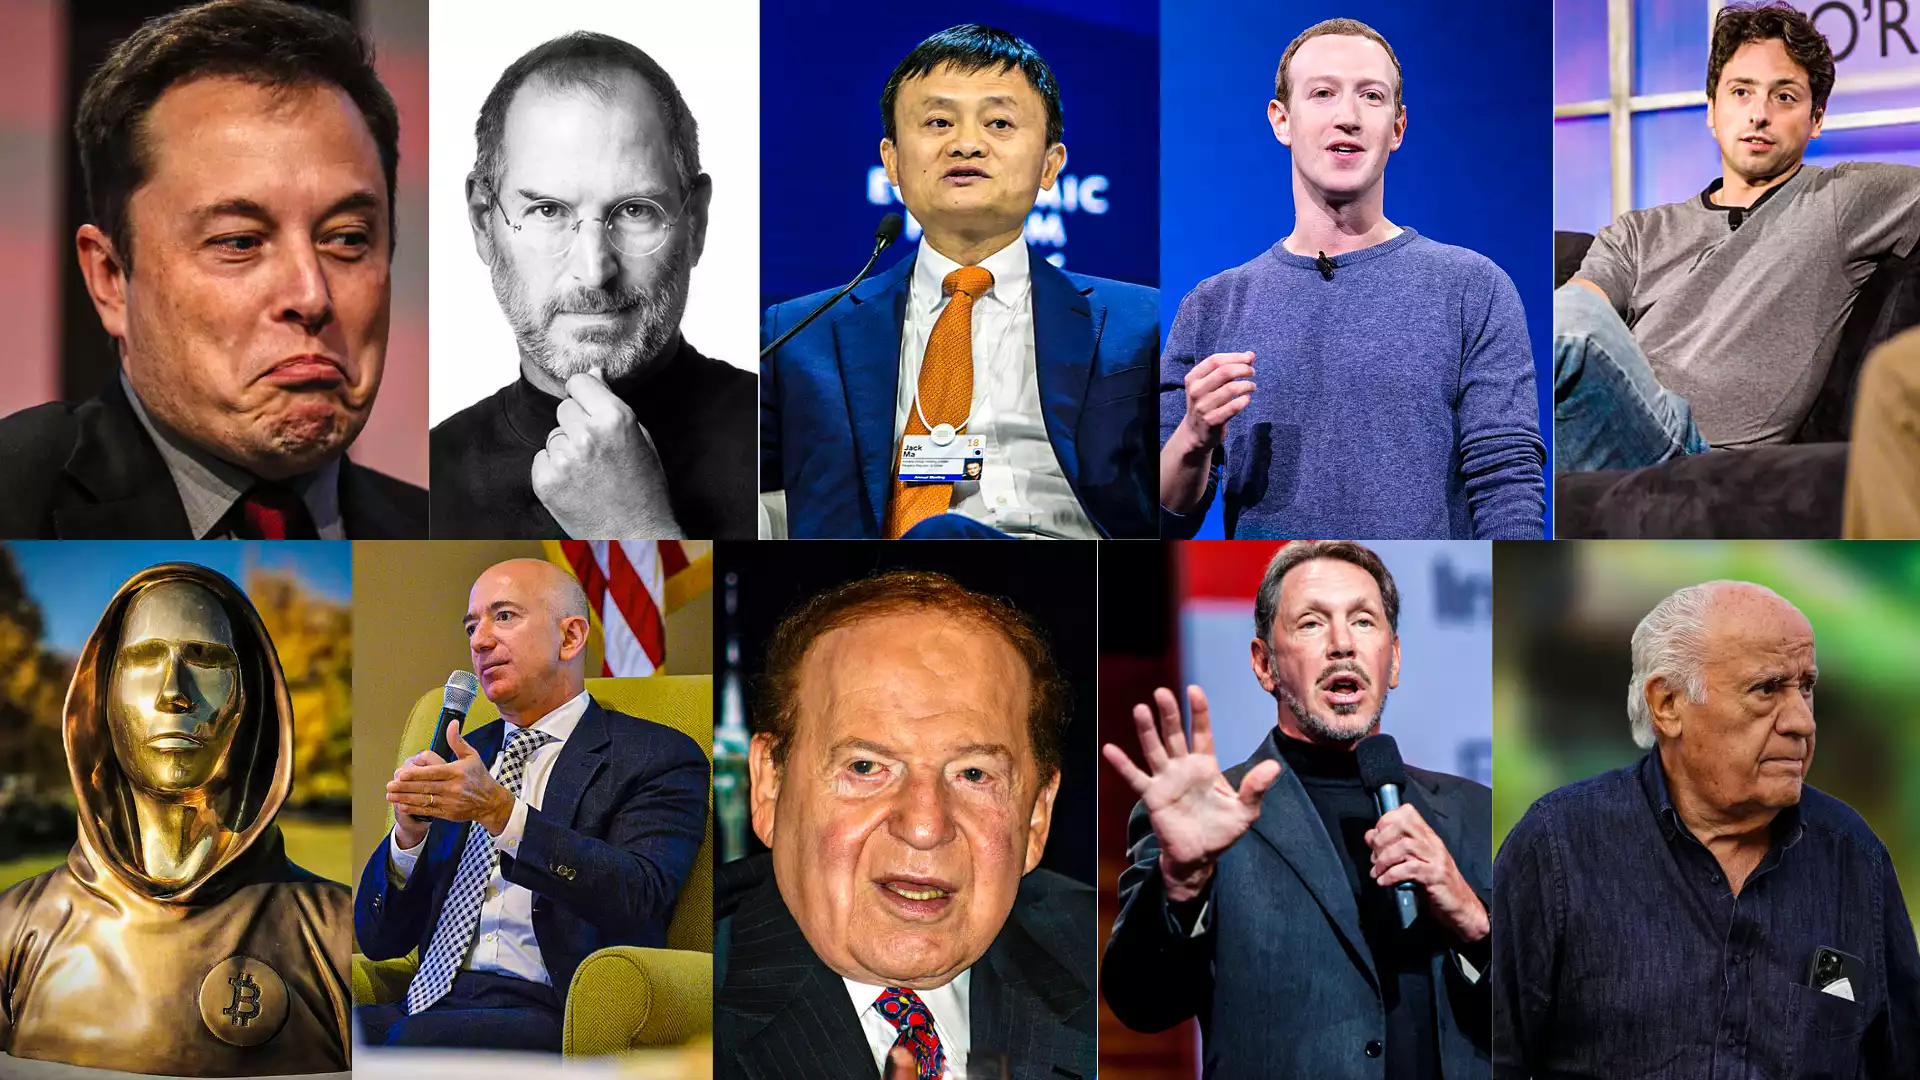 Top 10 Most Successful Entrepreneurs of the 21st Century